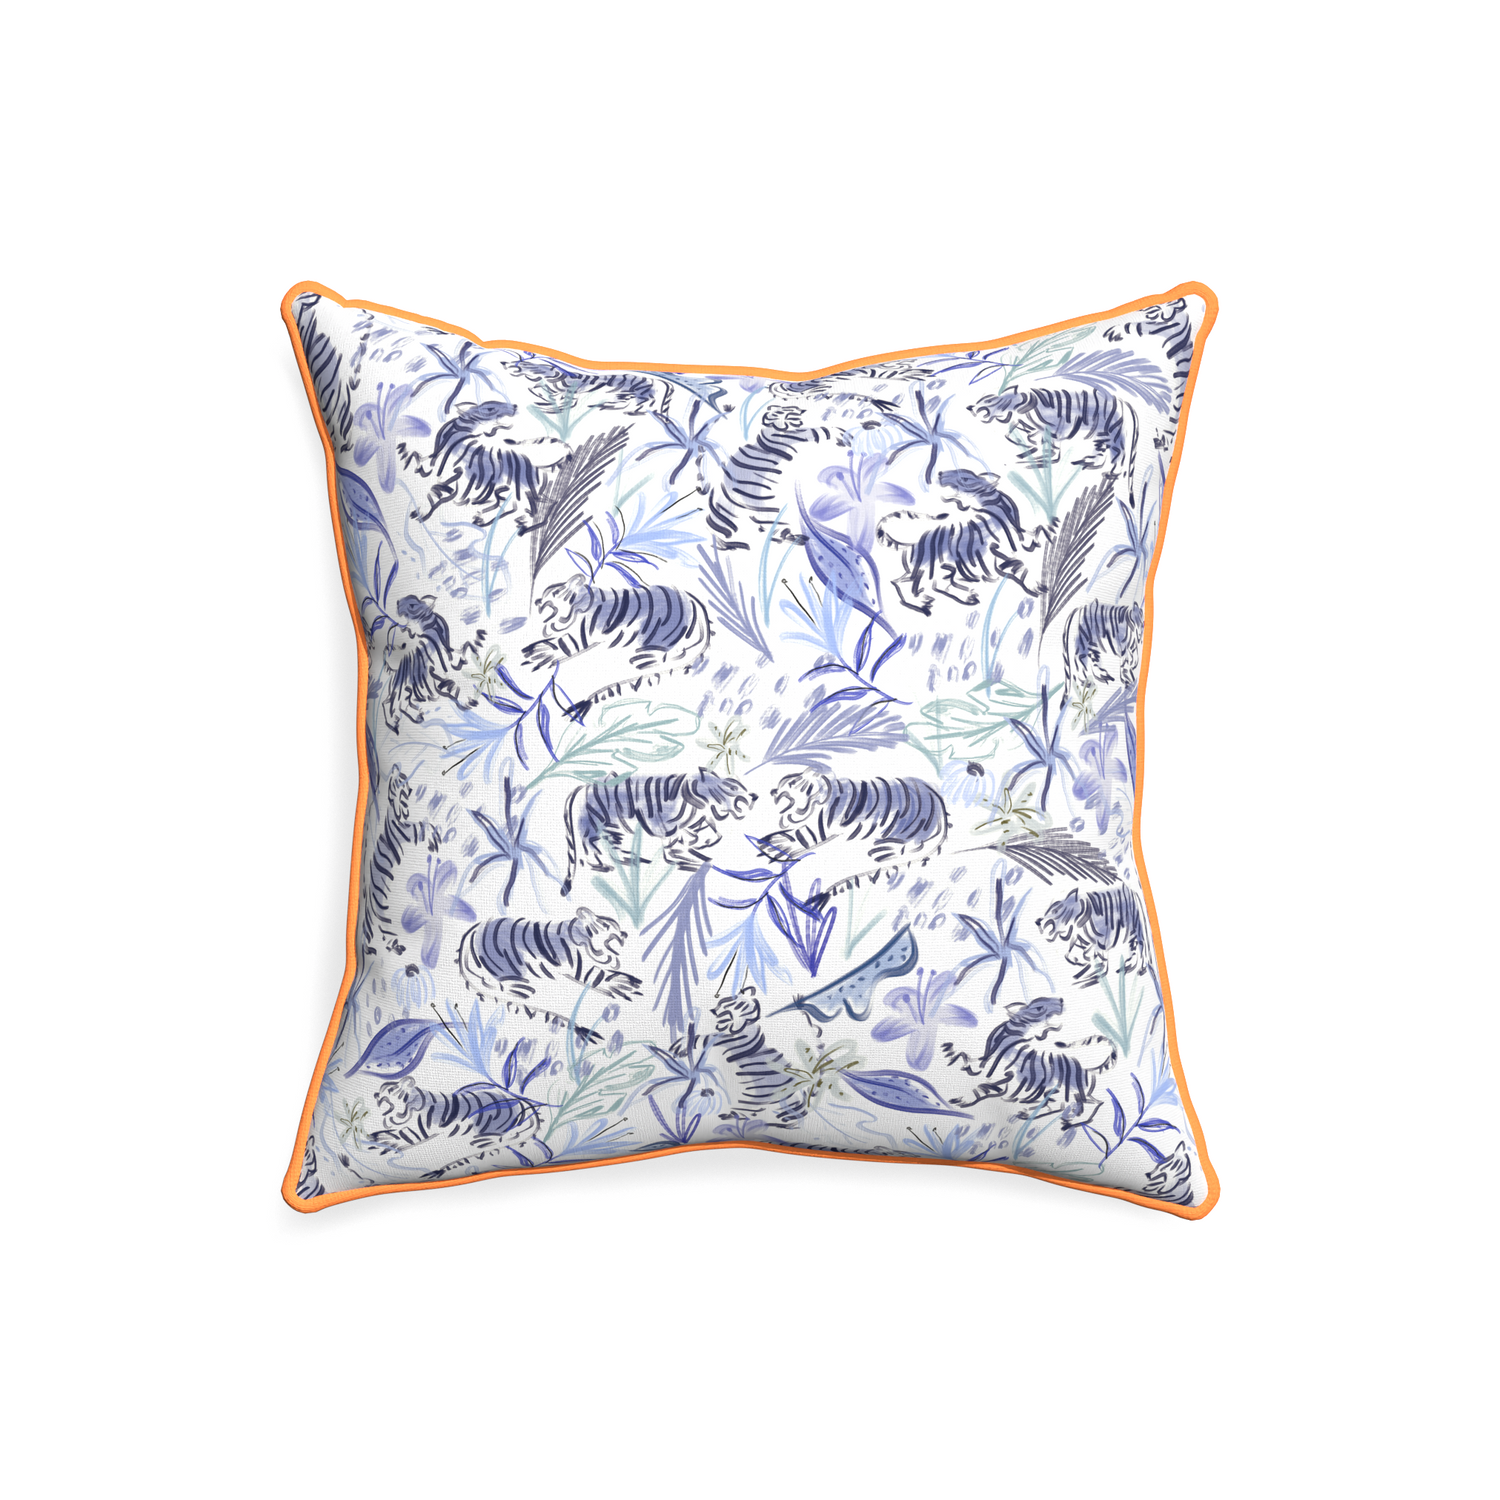 20-square frida blue custom blue with intricate tiger designpillow with clementine piping on white background